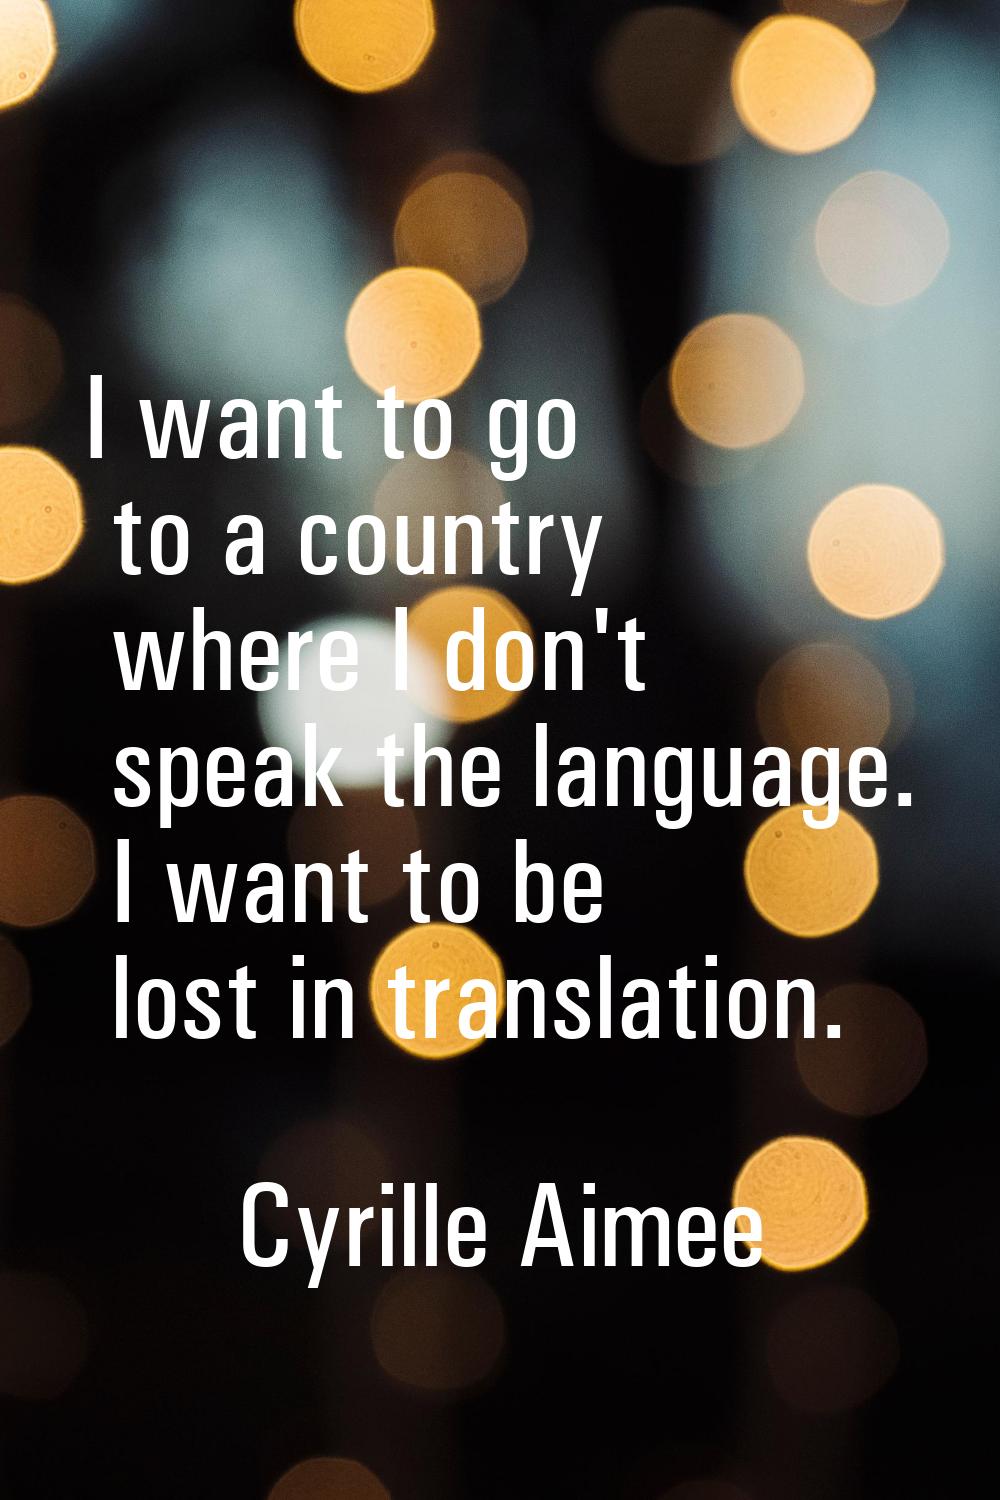 I want to go to a country where I don't speak the language. I want to be lost in translation.